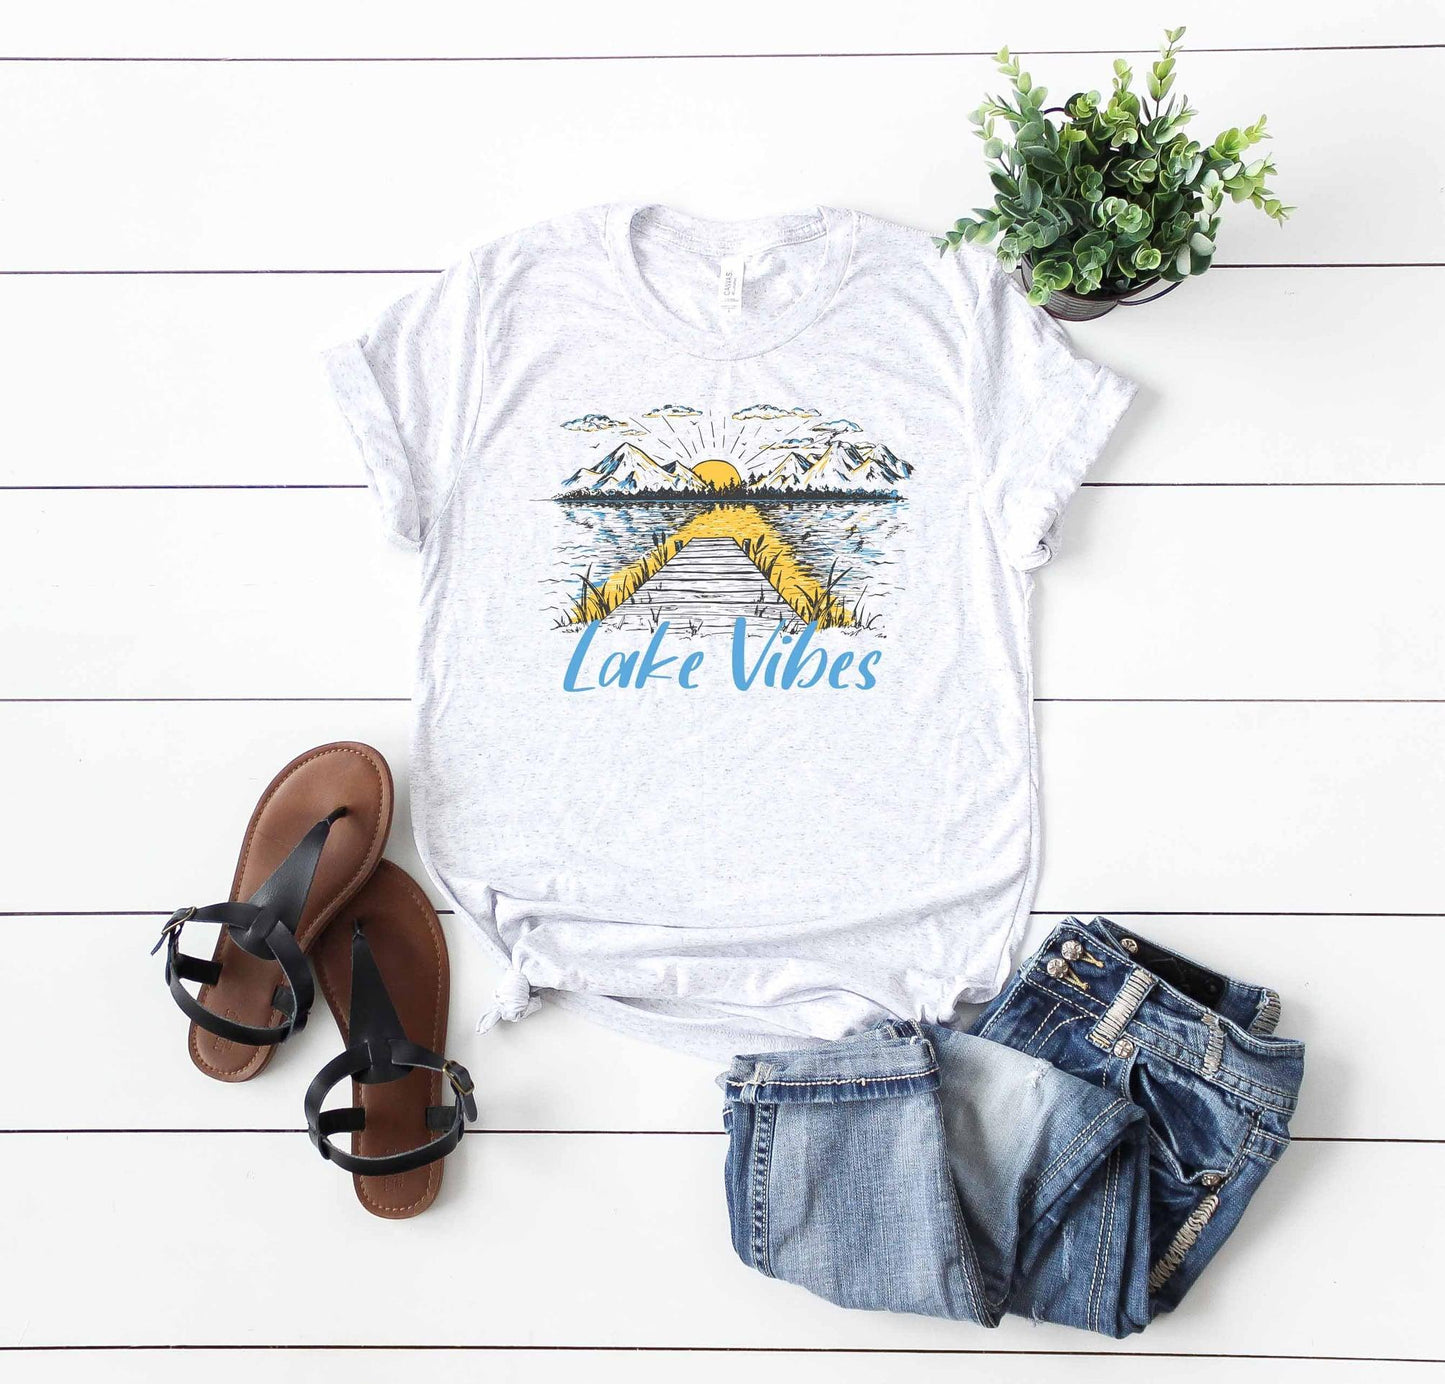 Lake Vibes HIGH HEAT - Texas Transfers and Designs